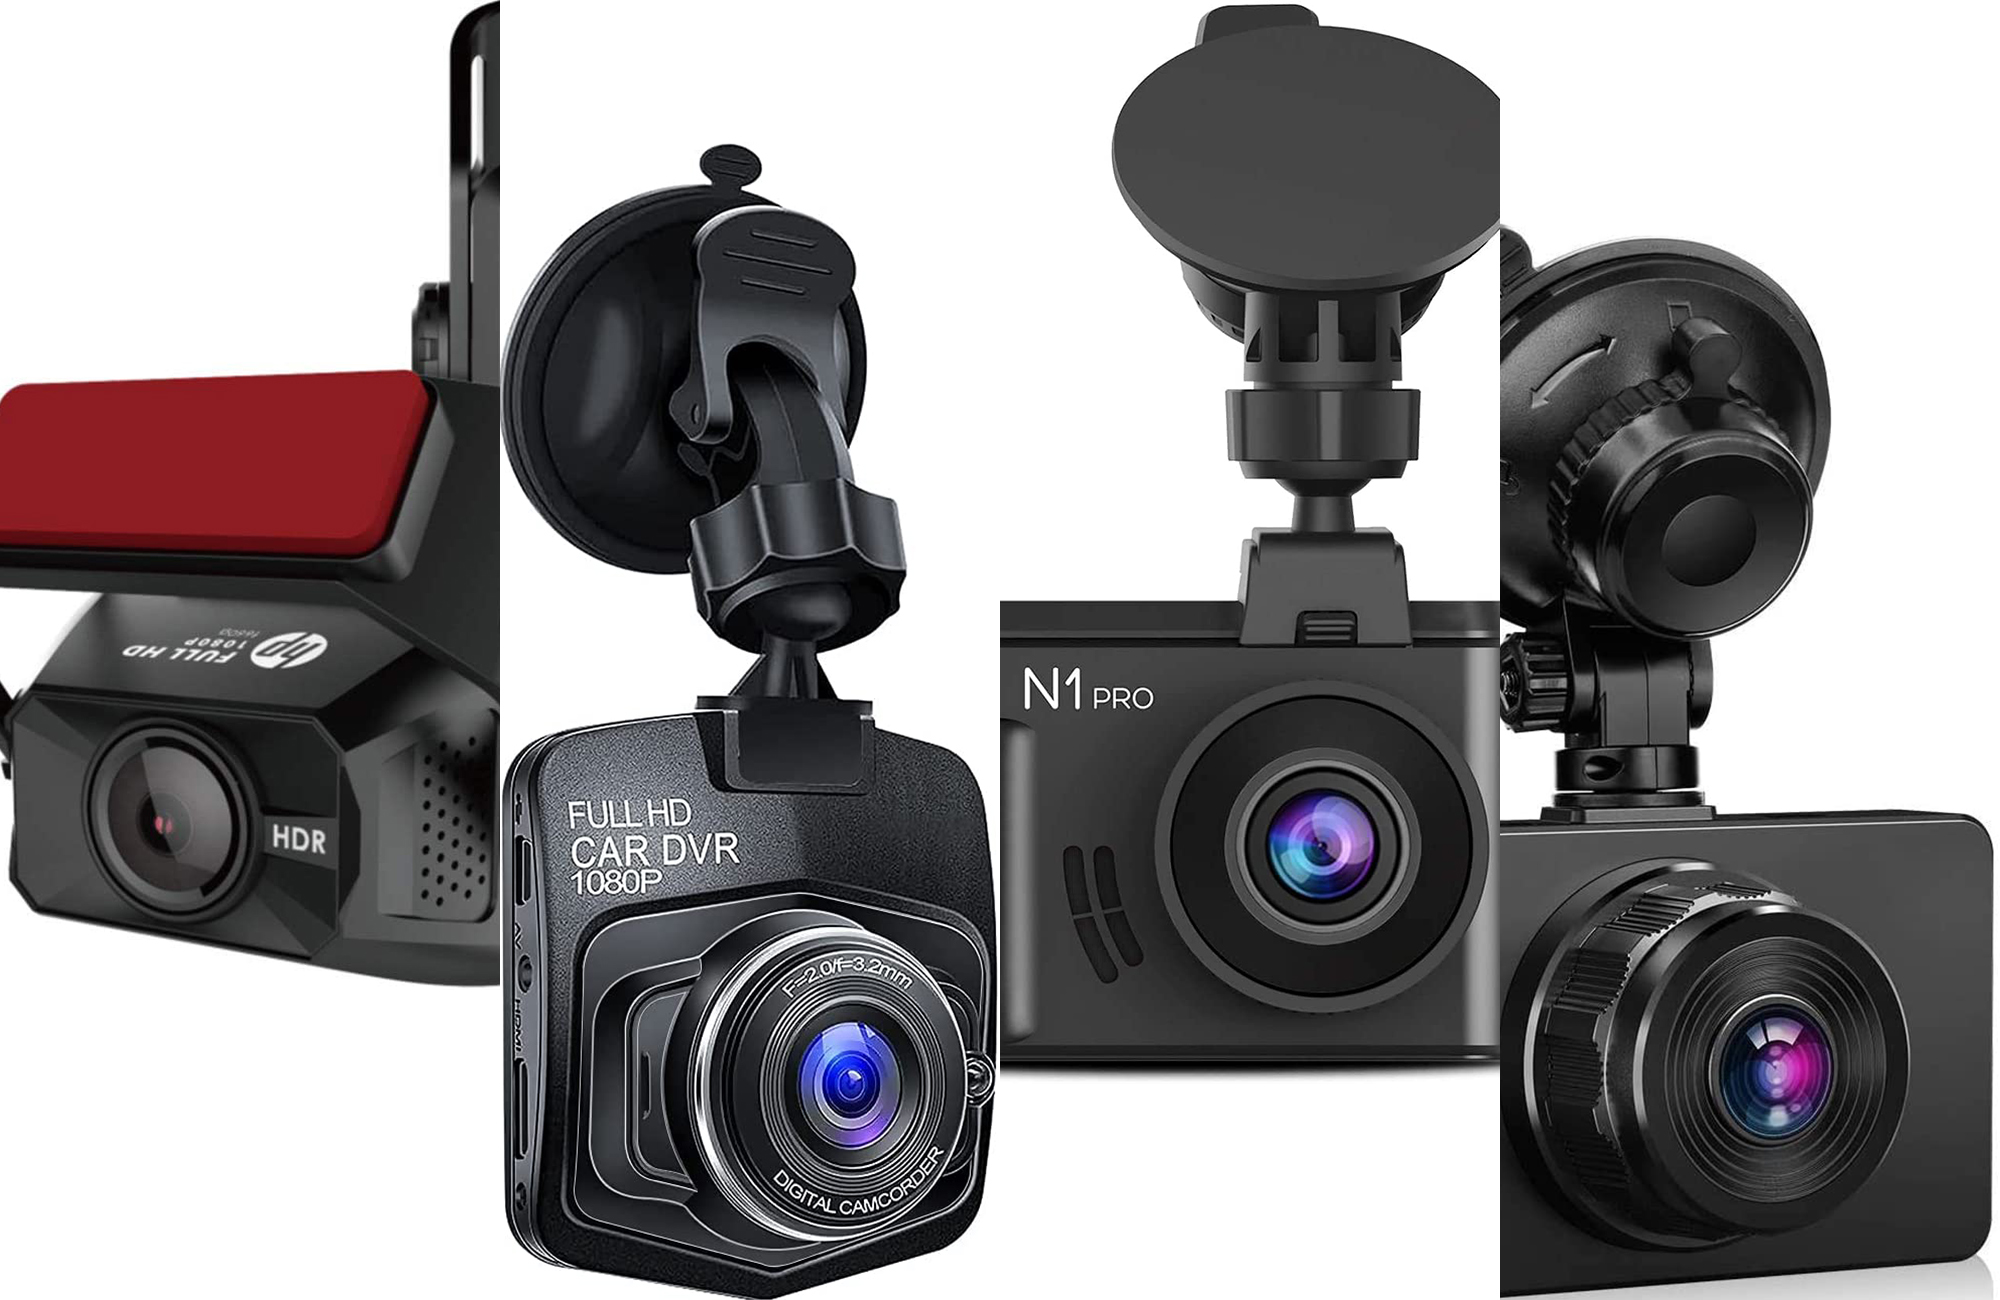 Best Dash Cams for Truckers (Review & Buying Guide) in 2023